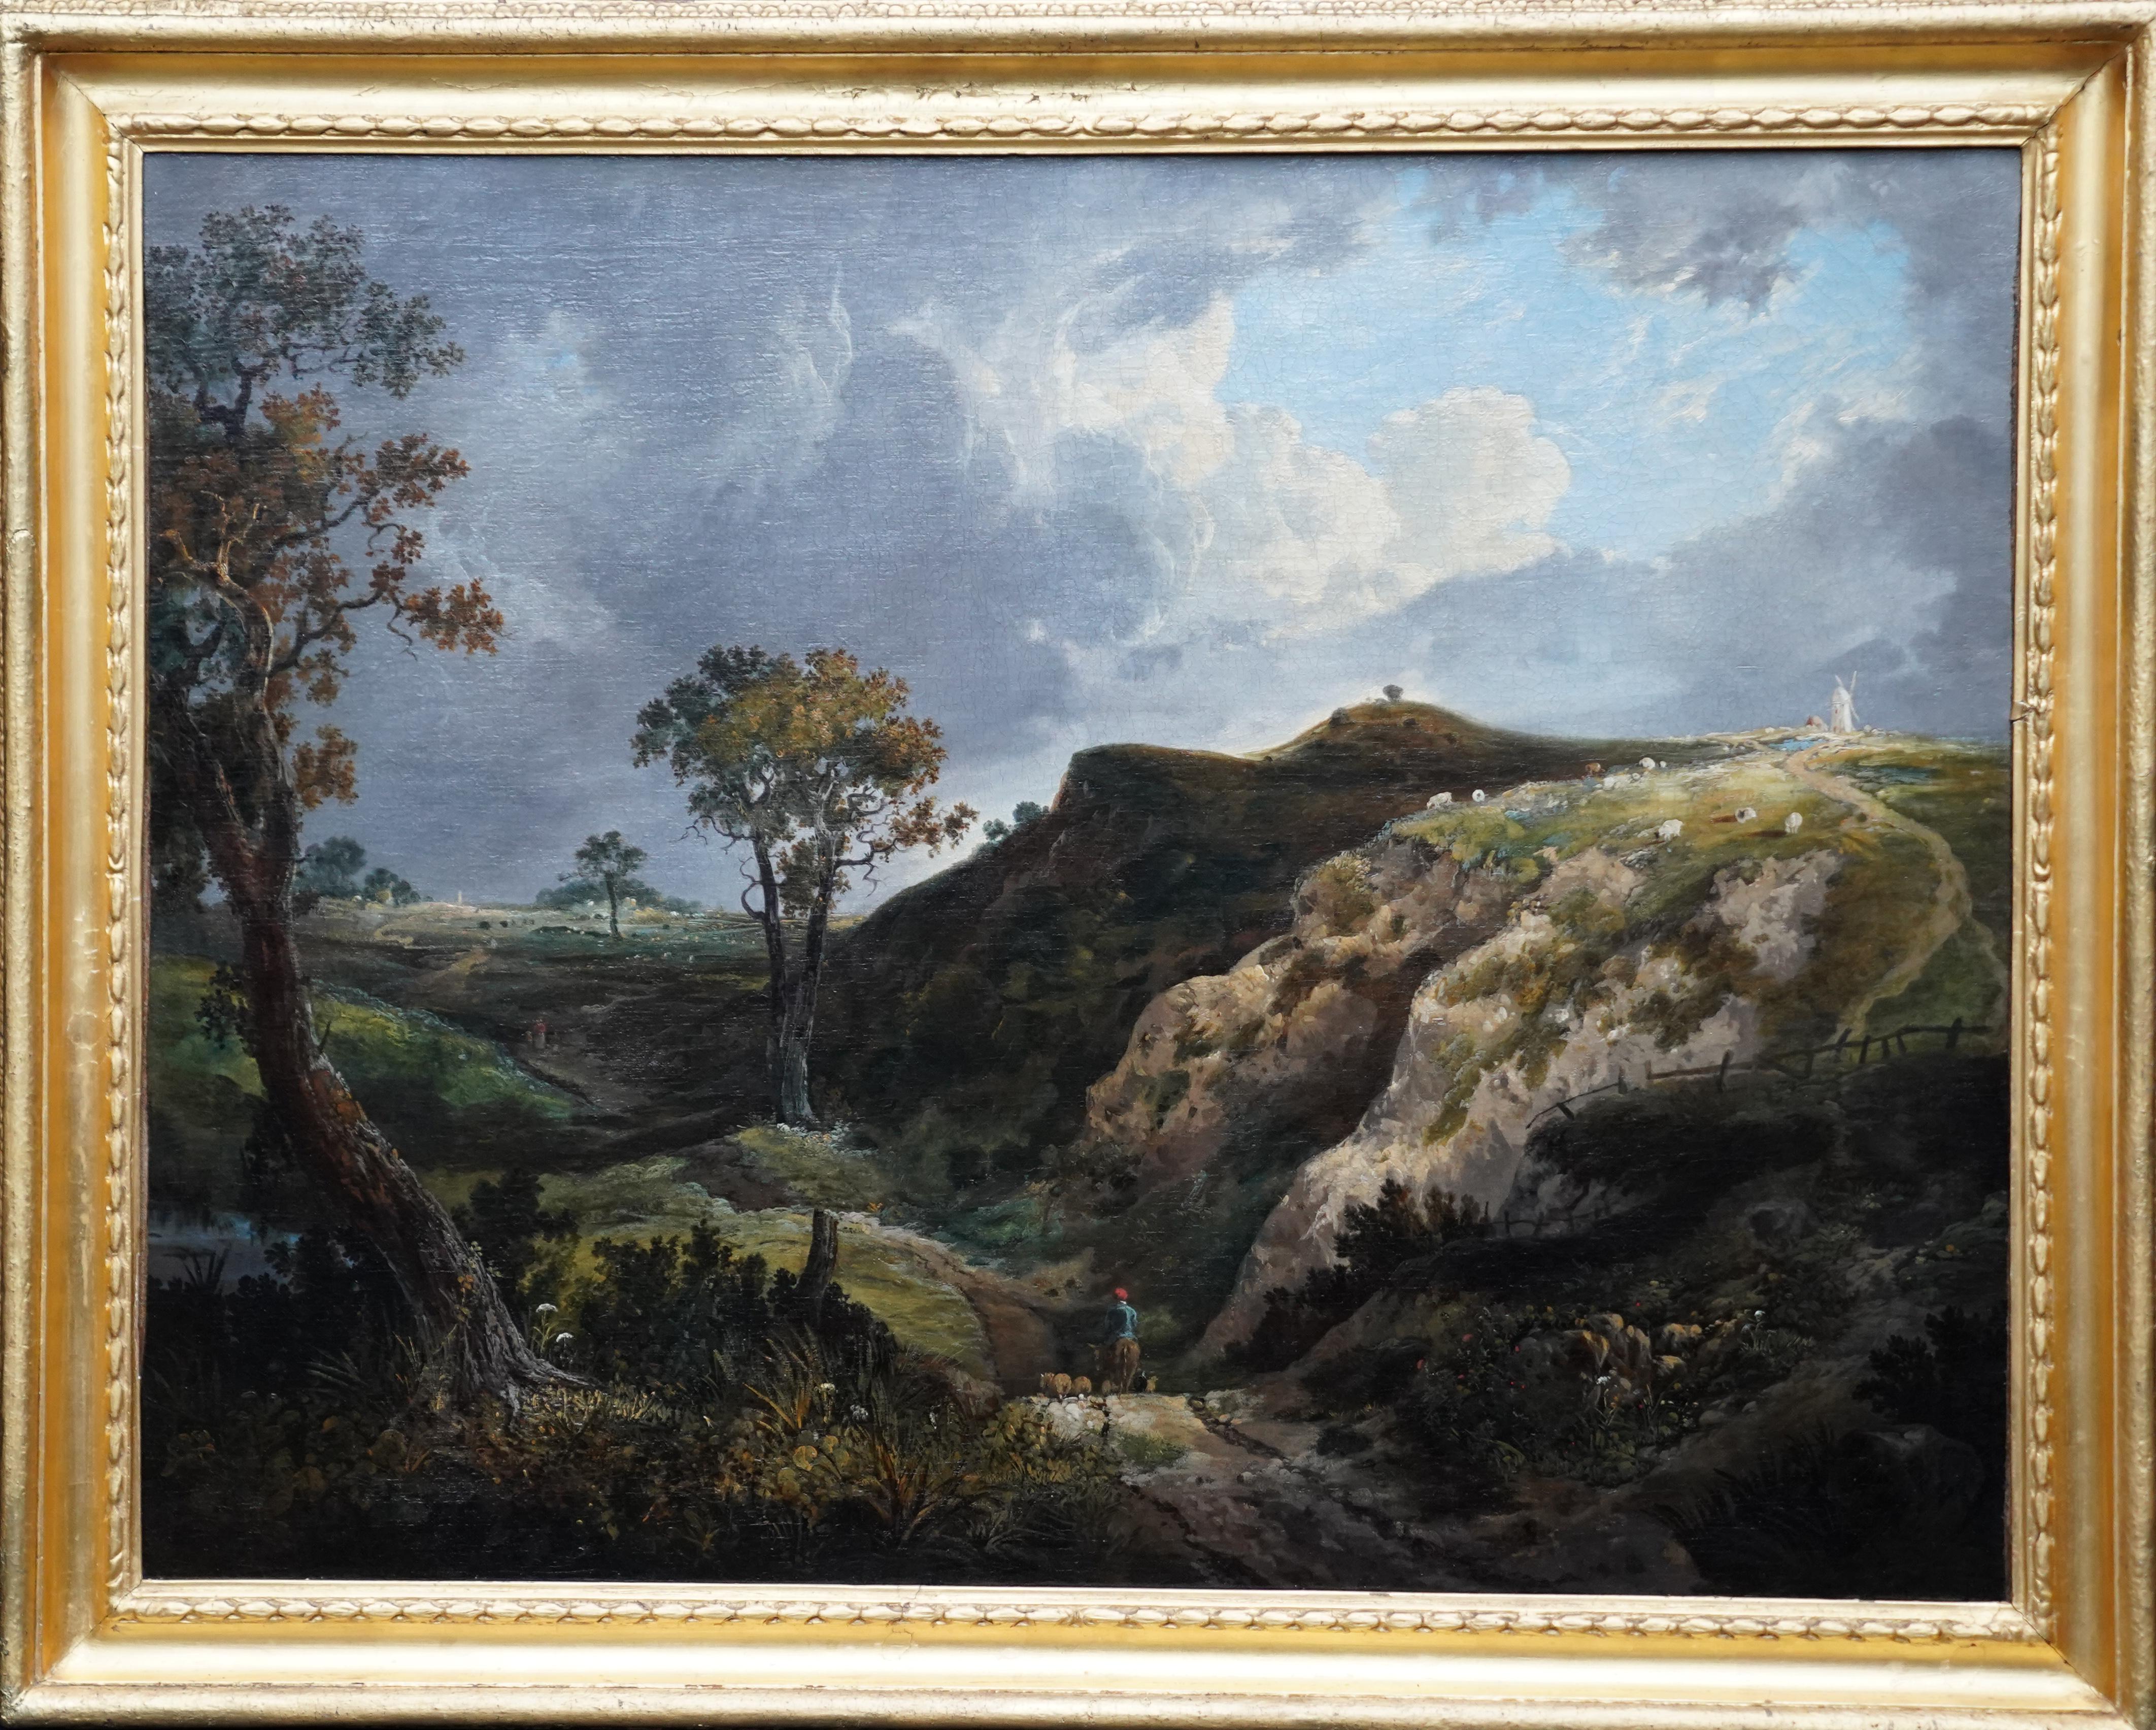  Landscape with Windmill on Hill - British 1800 Old Master art oil painting  For Sale 6